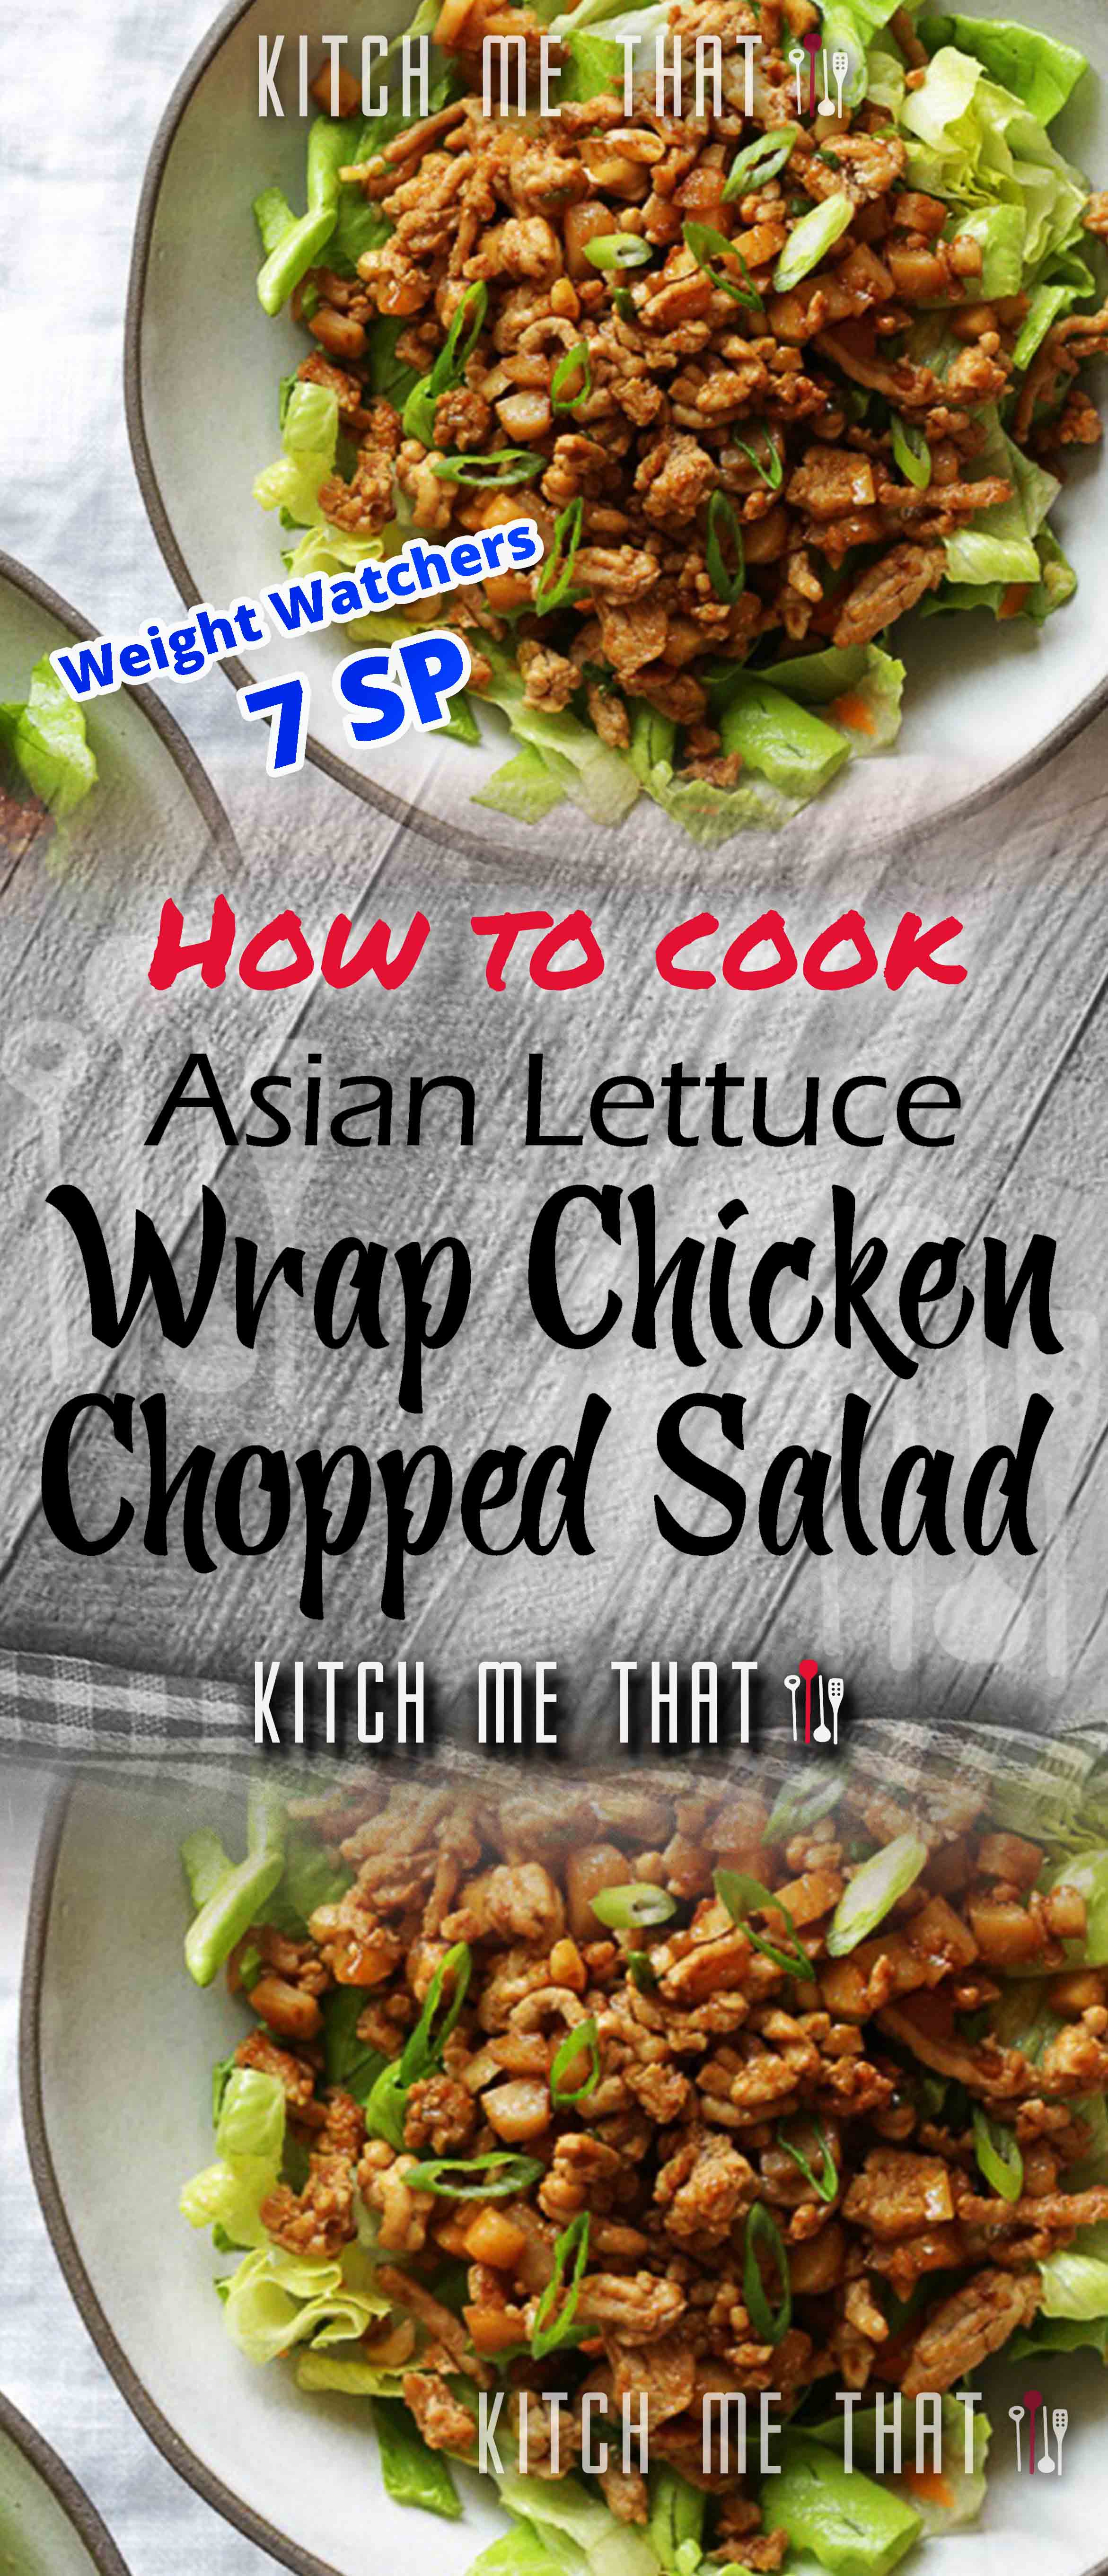 Exclusive Asian Lettuce Wrap Chicken Chopped Salad NEW 2021